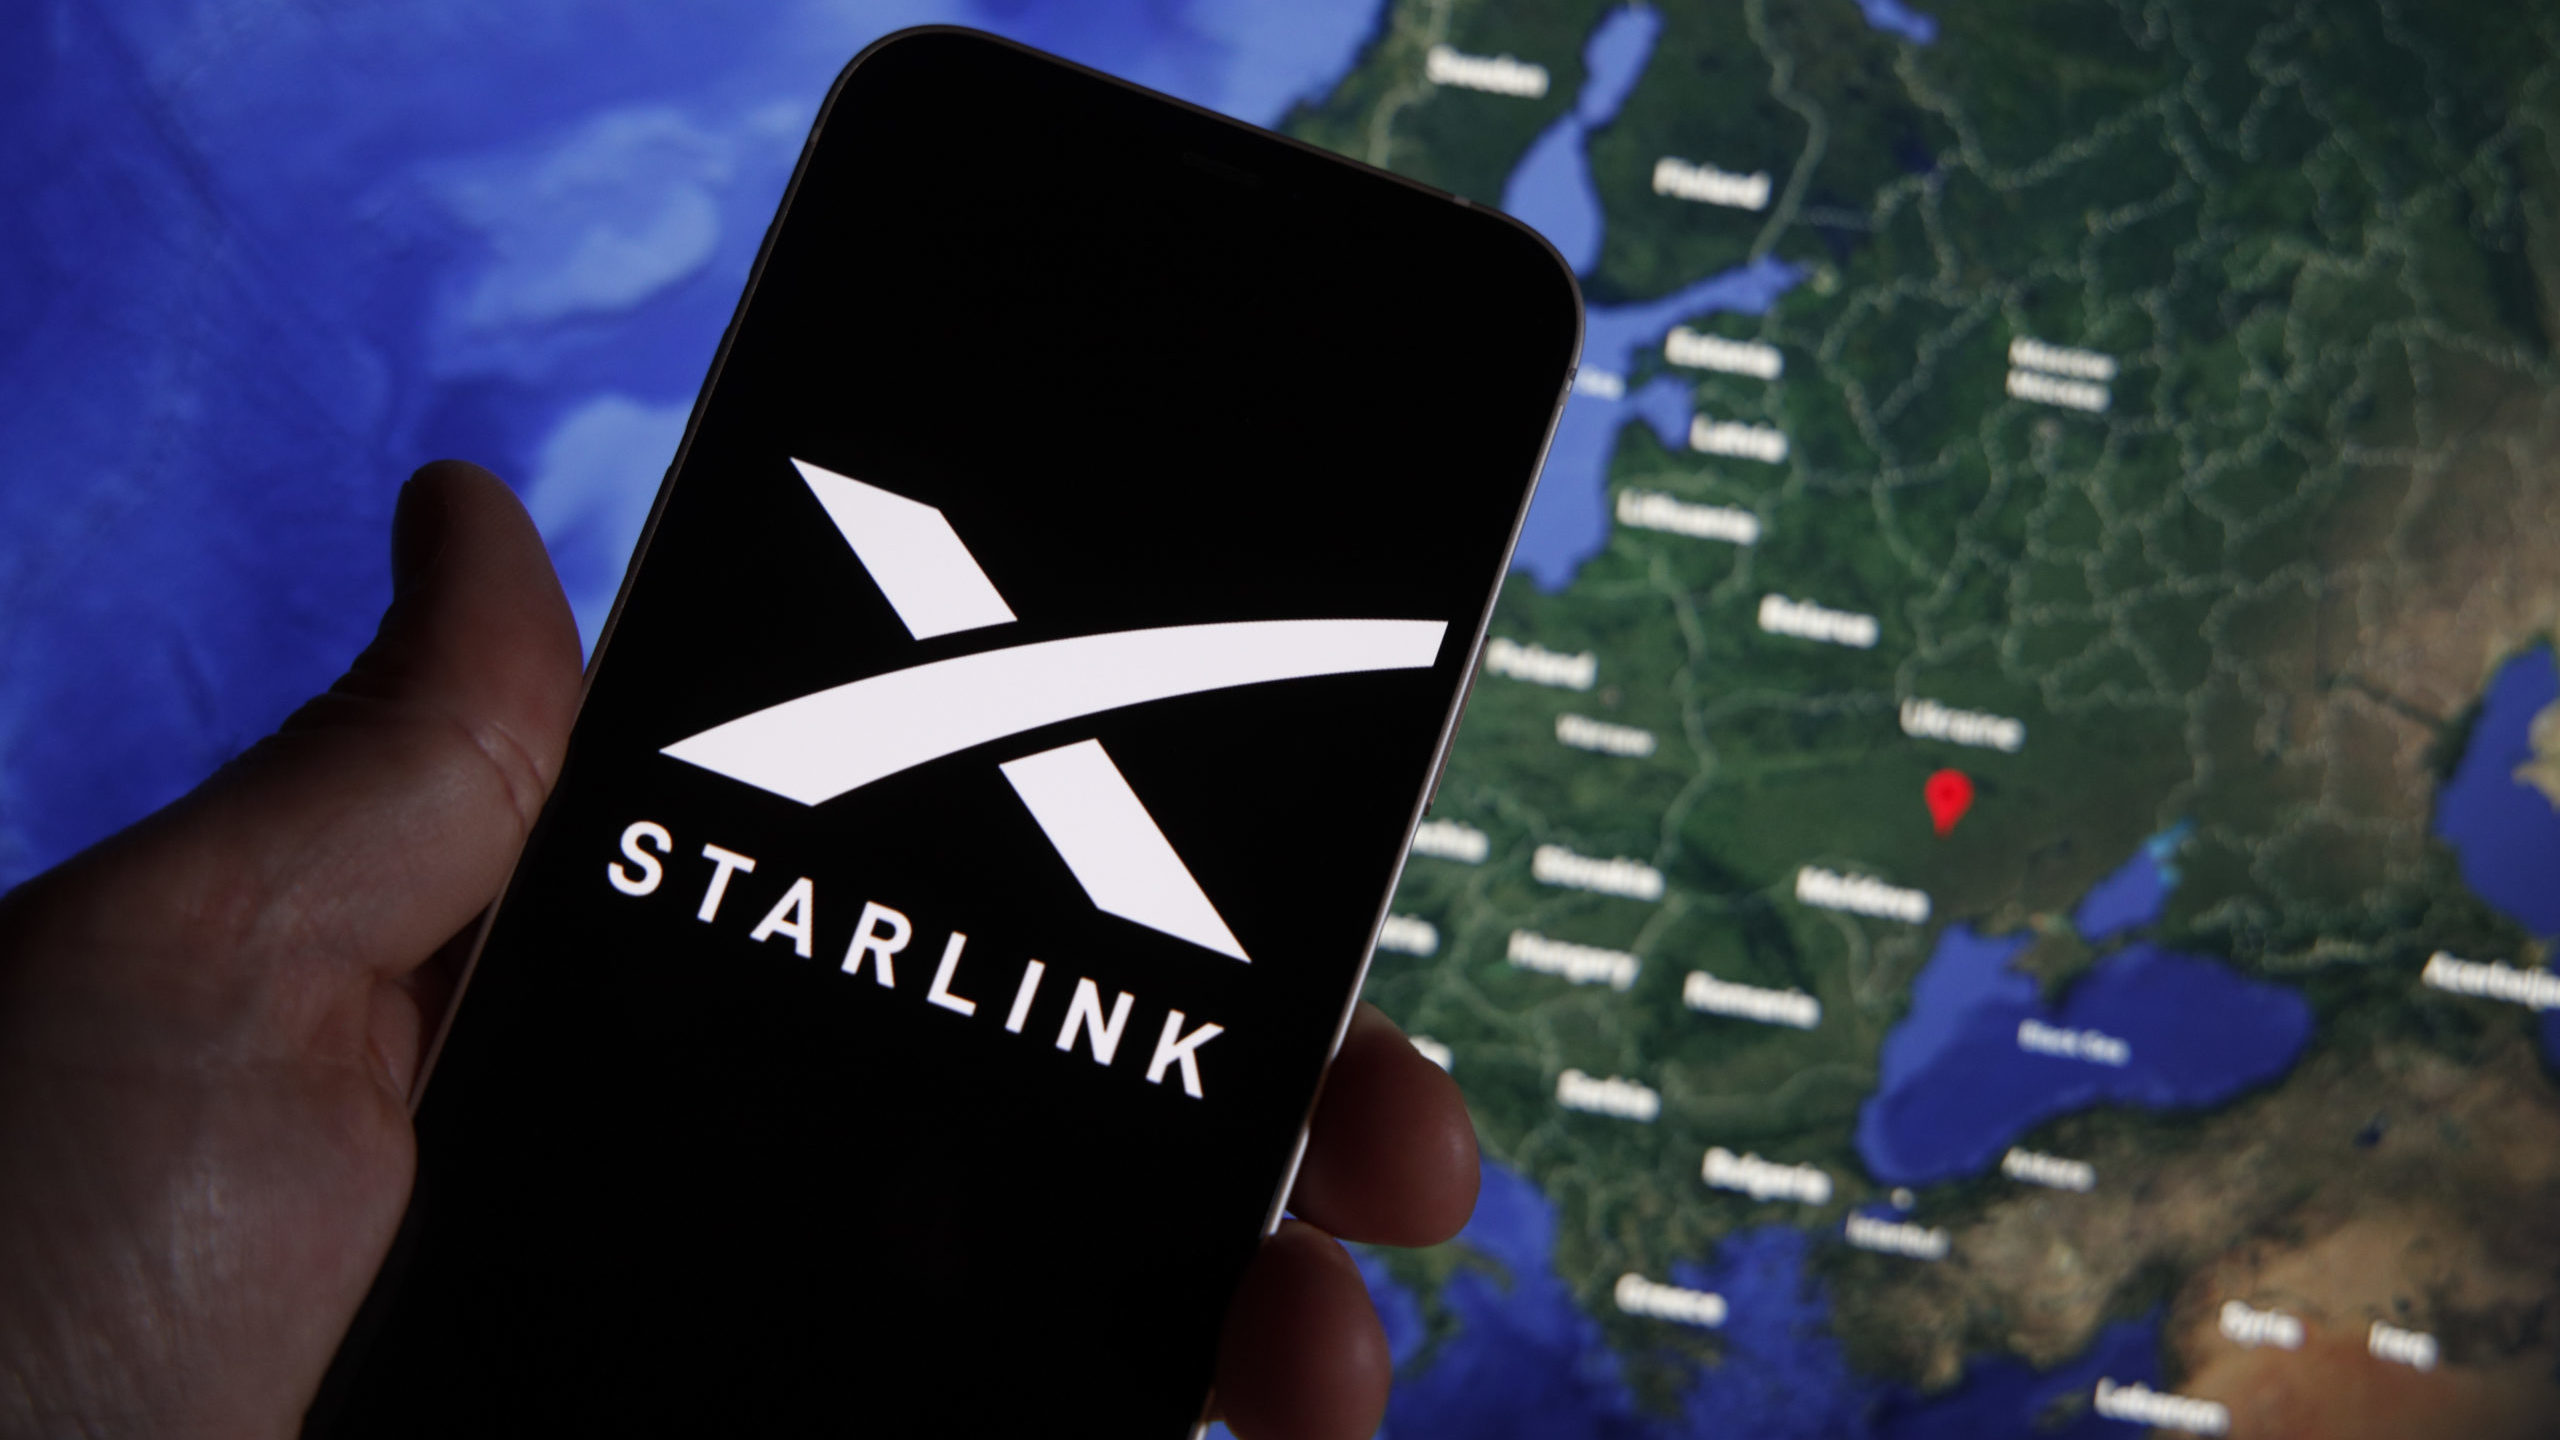 About 100 Starlink Internet Terminals Operating in Iran, Musk Says